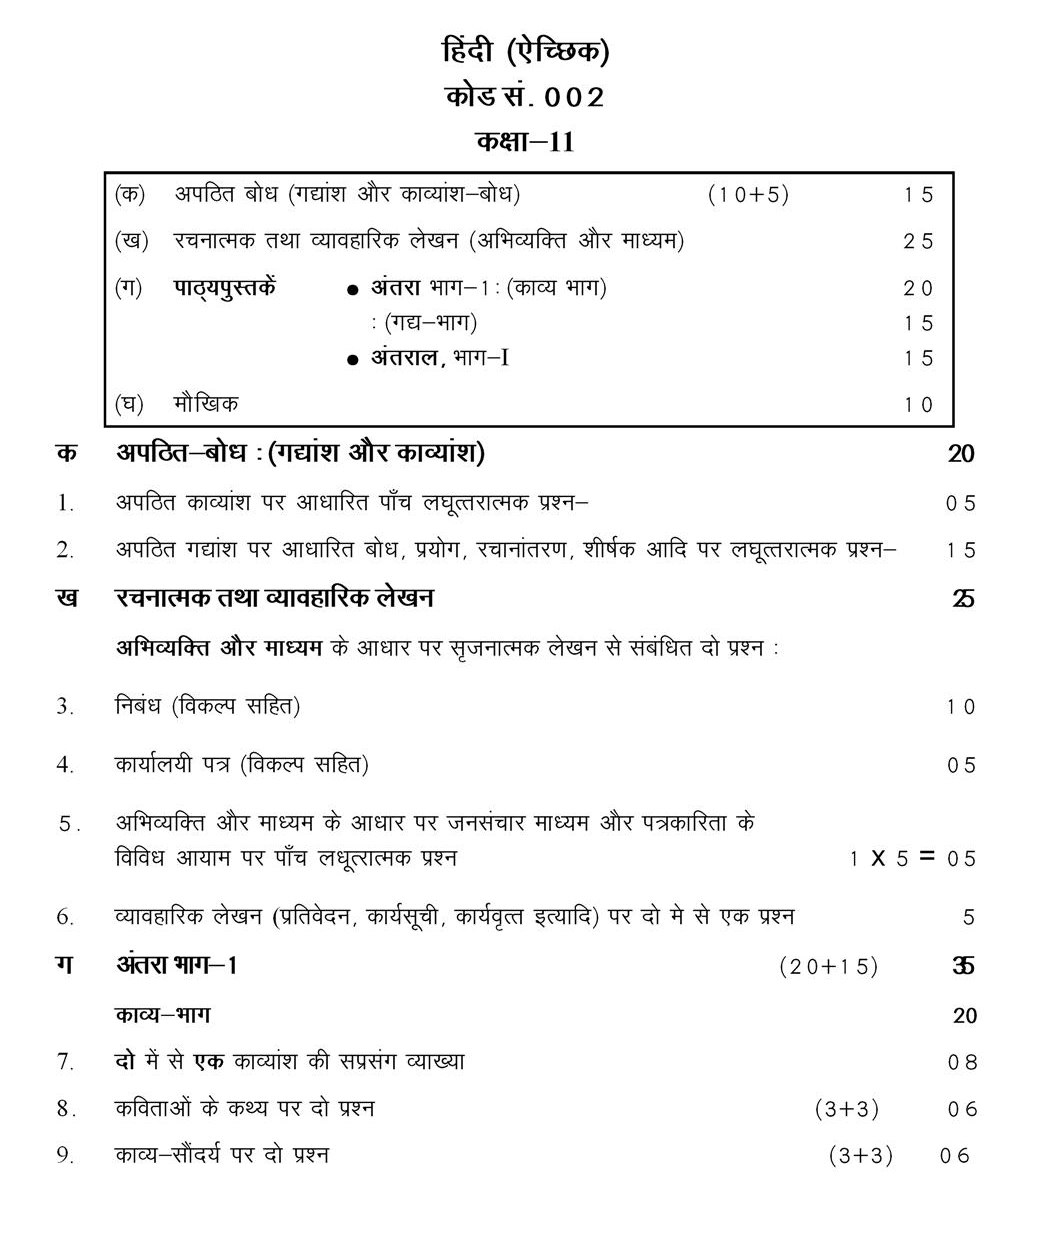 11th ncert math solution in hindi pdf download